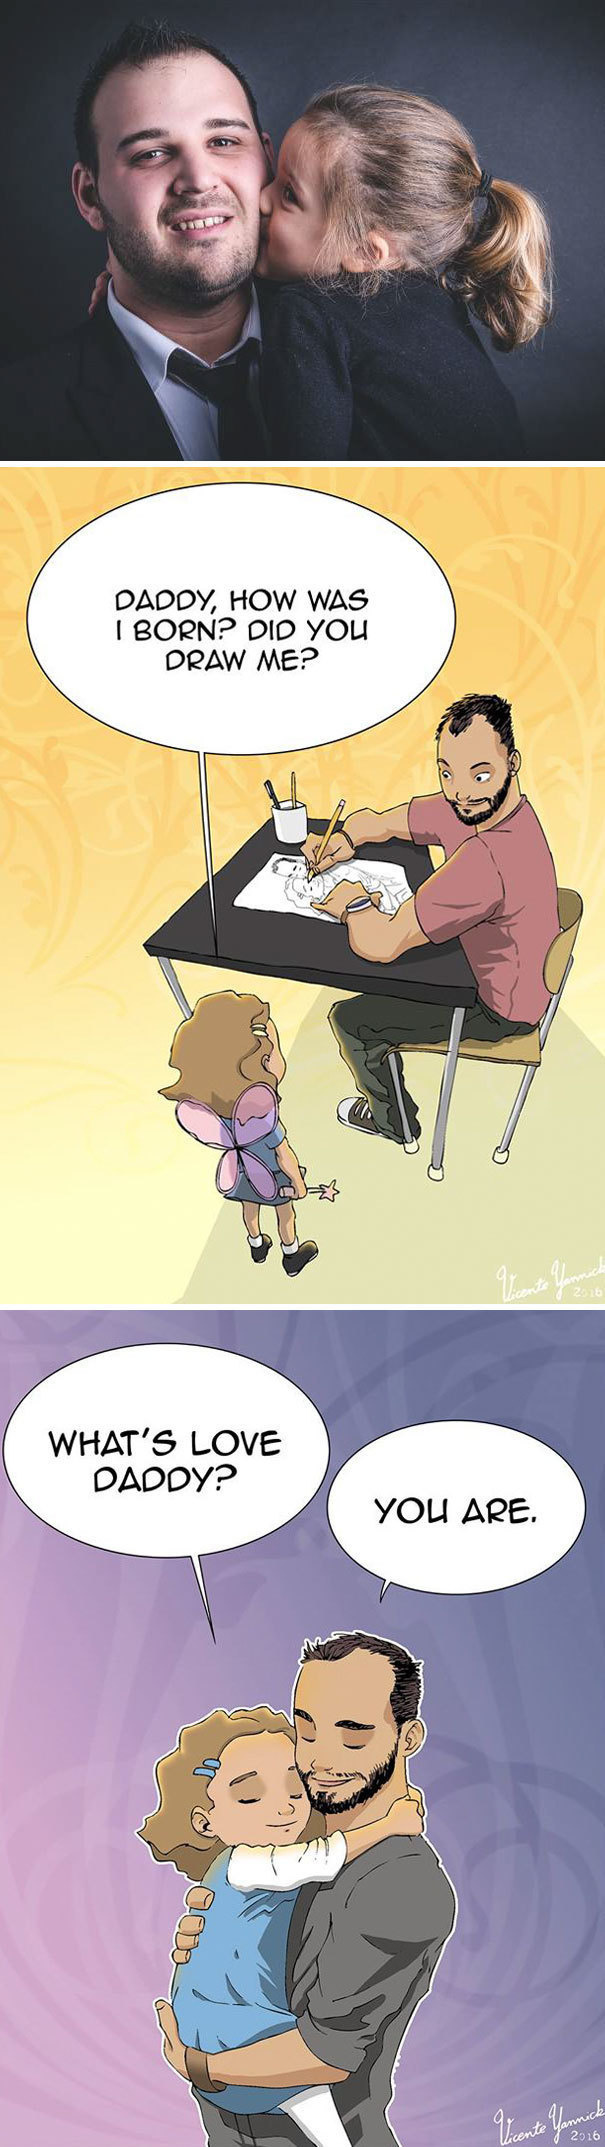 This single dad makes heartwarming illustrations of his everyday life with his daughter.